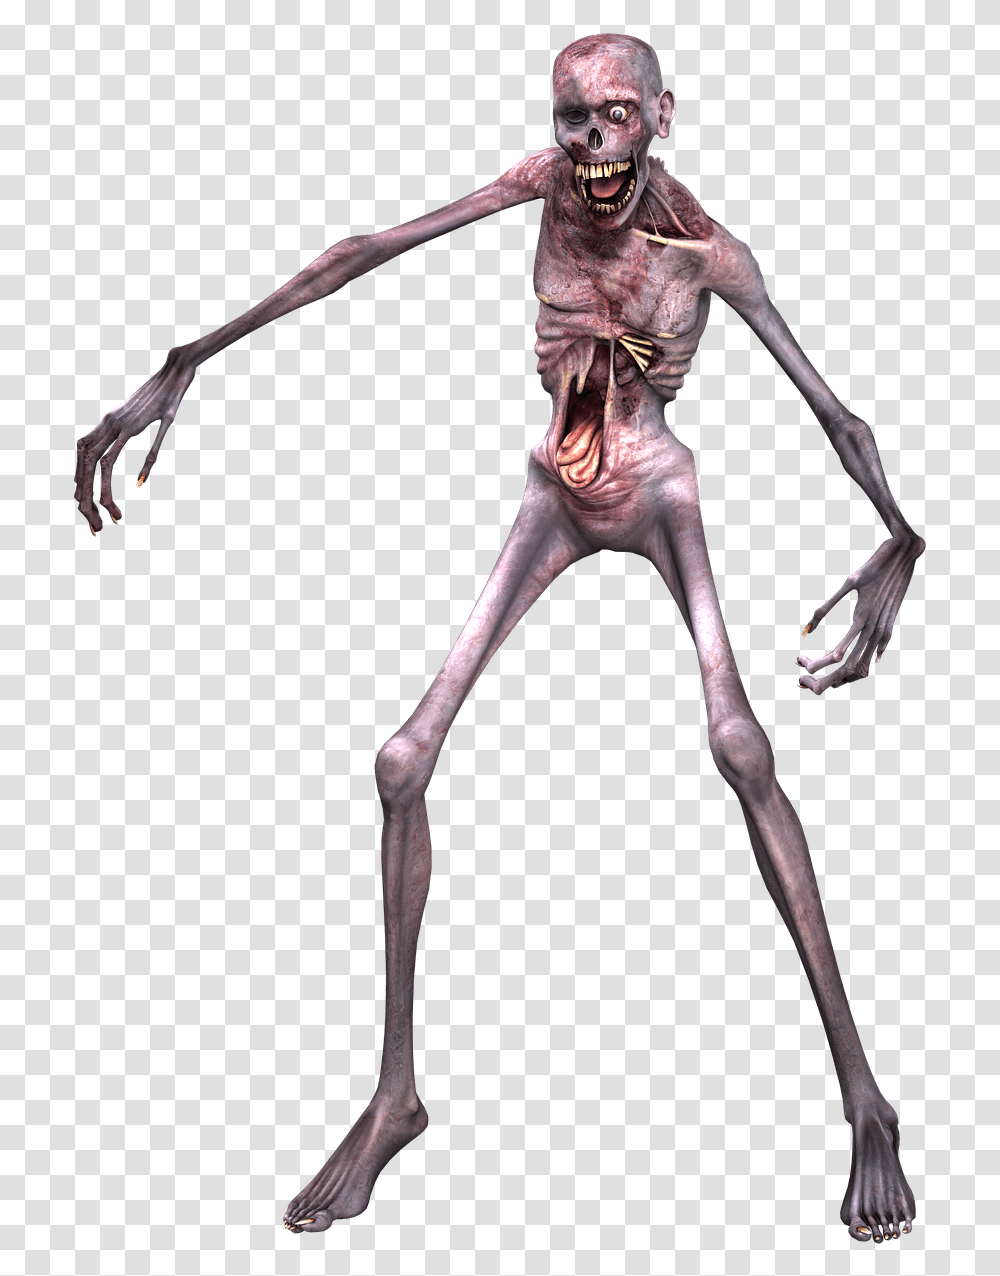 Zombie Man Horror Scary Frightening Death Pose Scary, Skeleton, Bird, Animal, Person Transparent Png